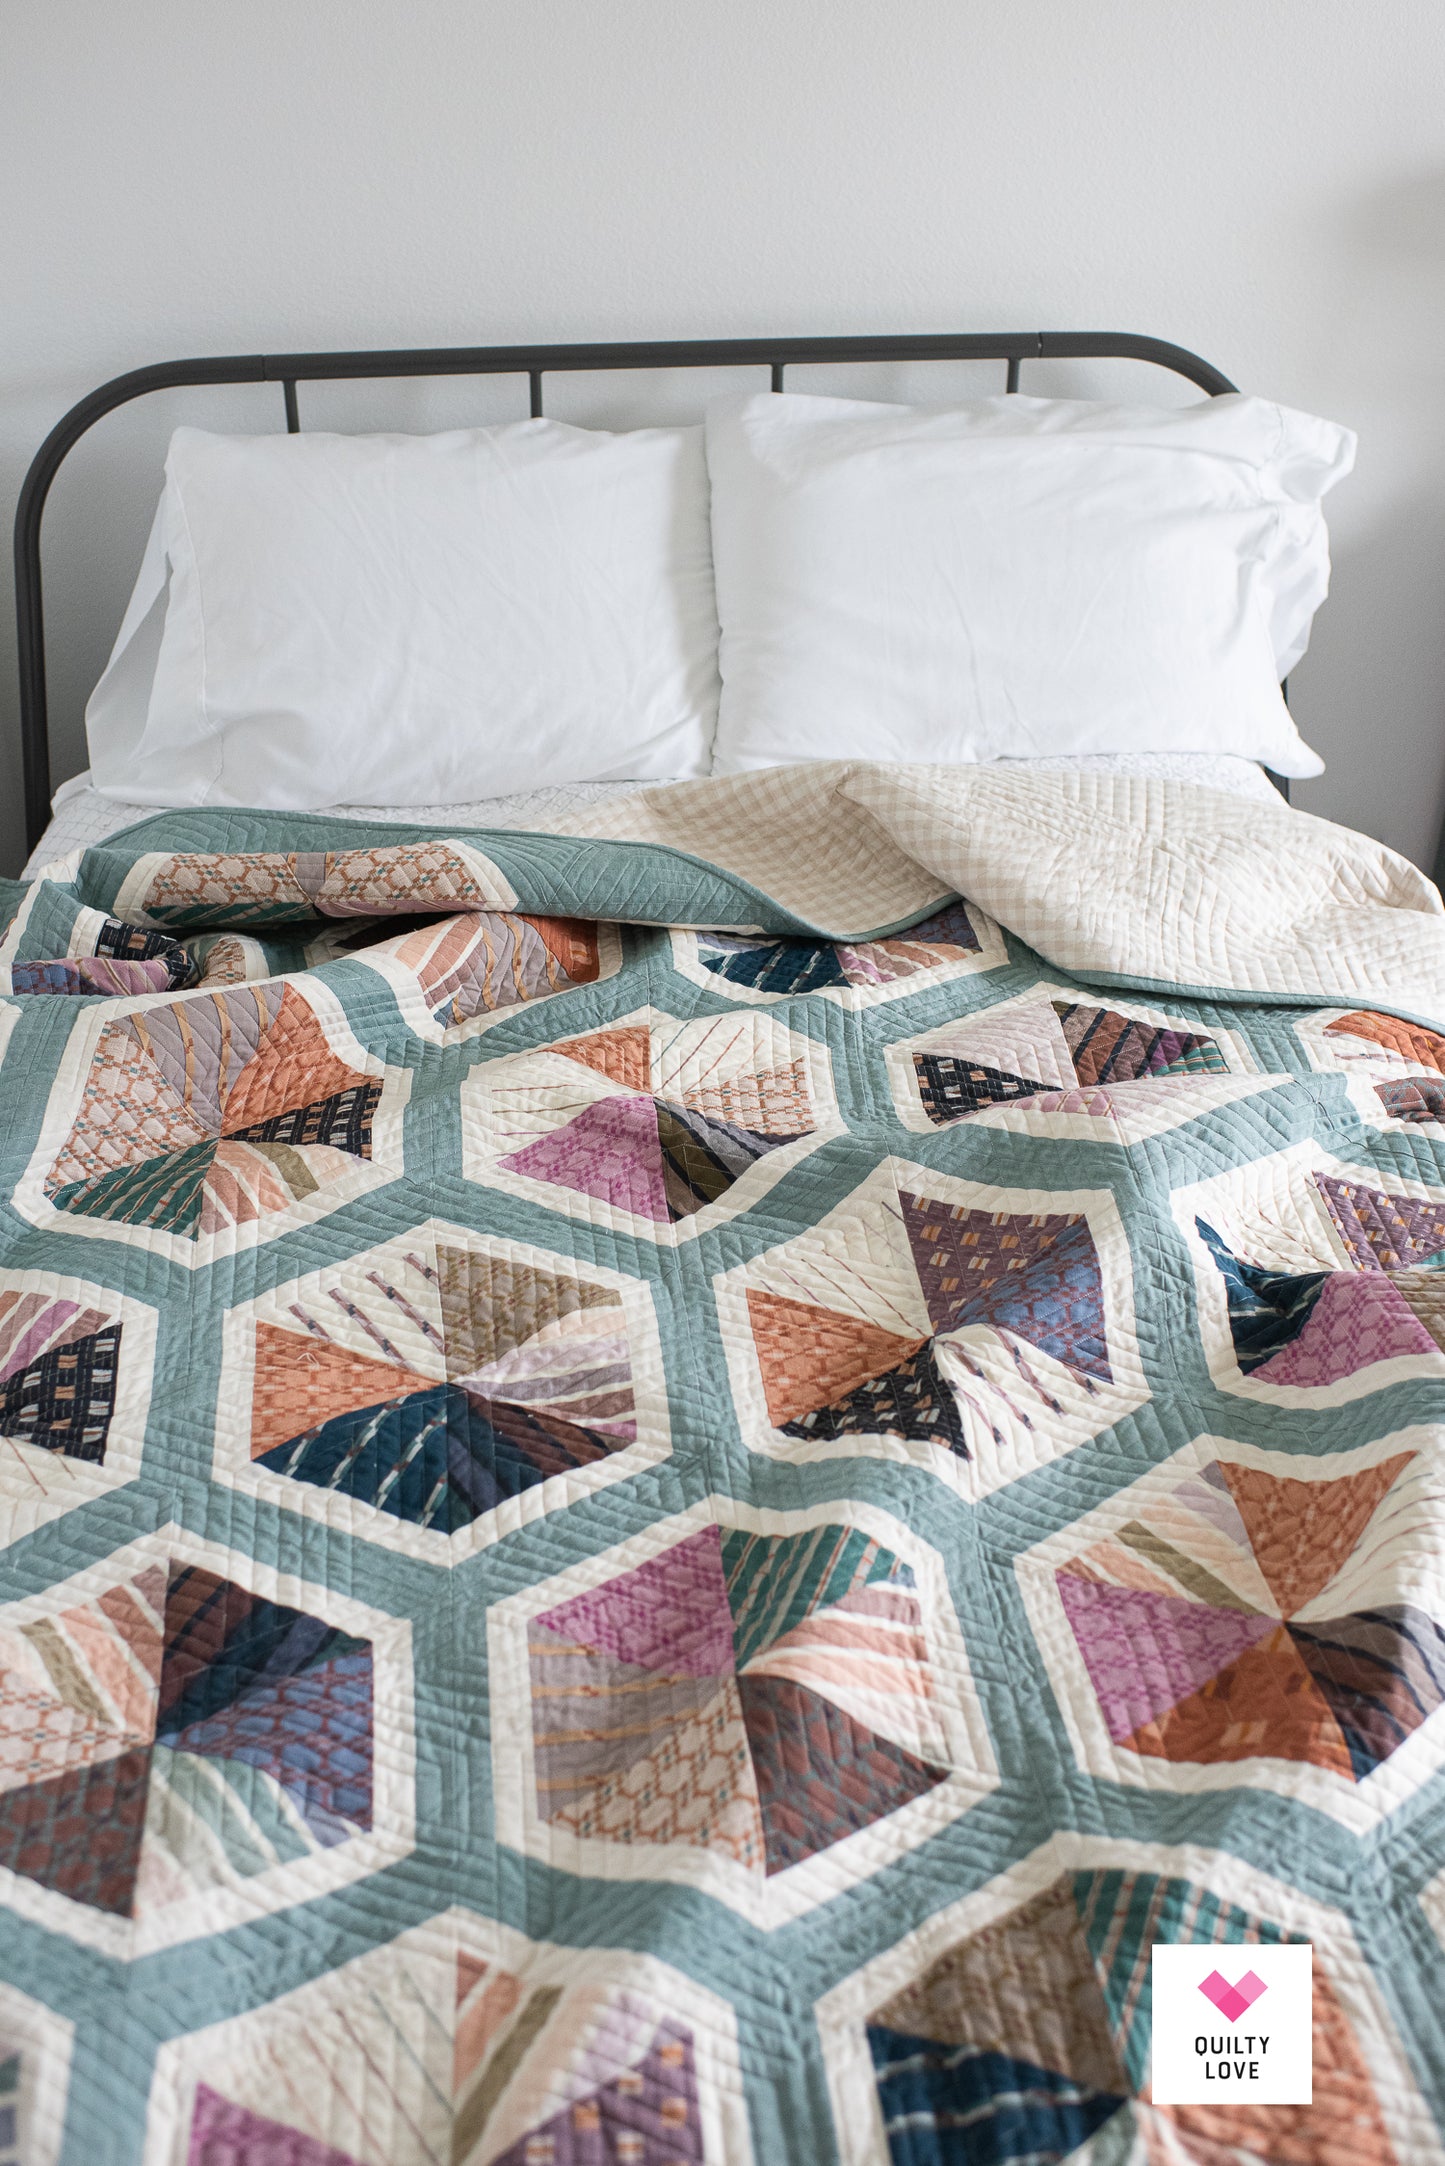 Triangle Hexies PDF quilt pattern